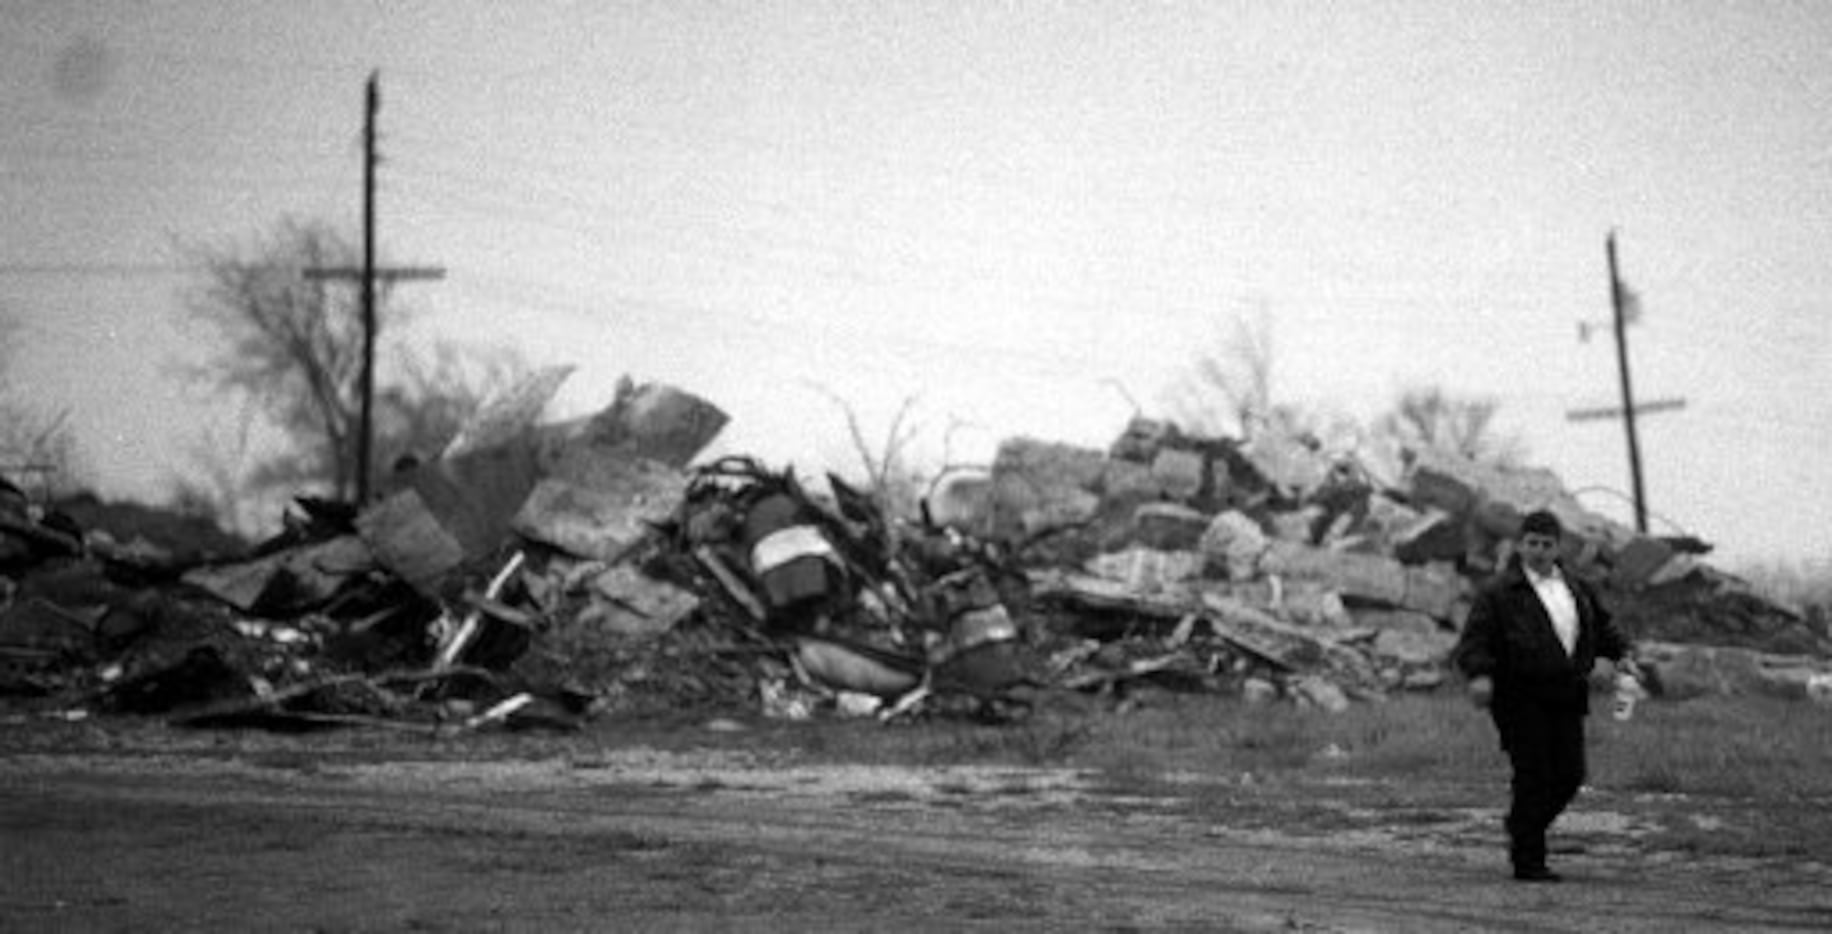 Rubble at the compound one year after the February 28 gunbattle that started the standoff.